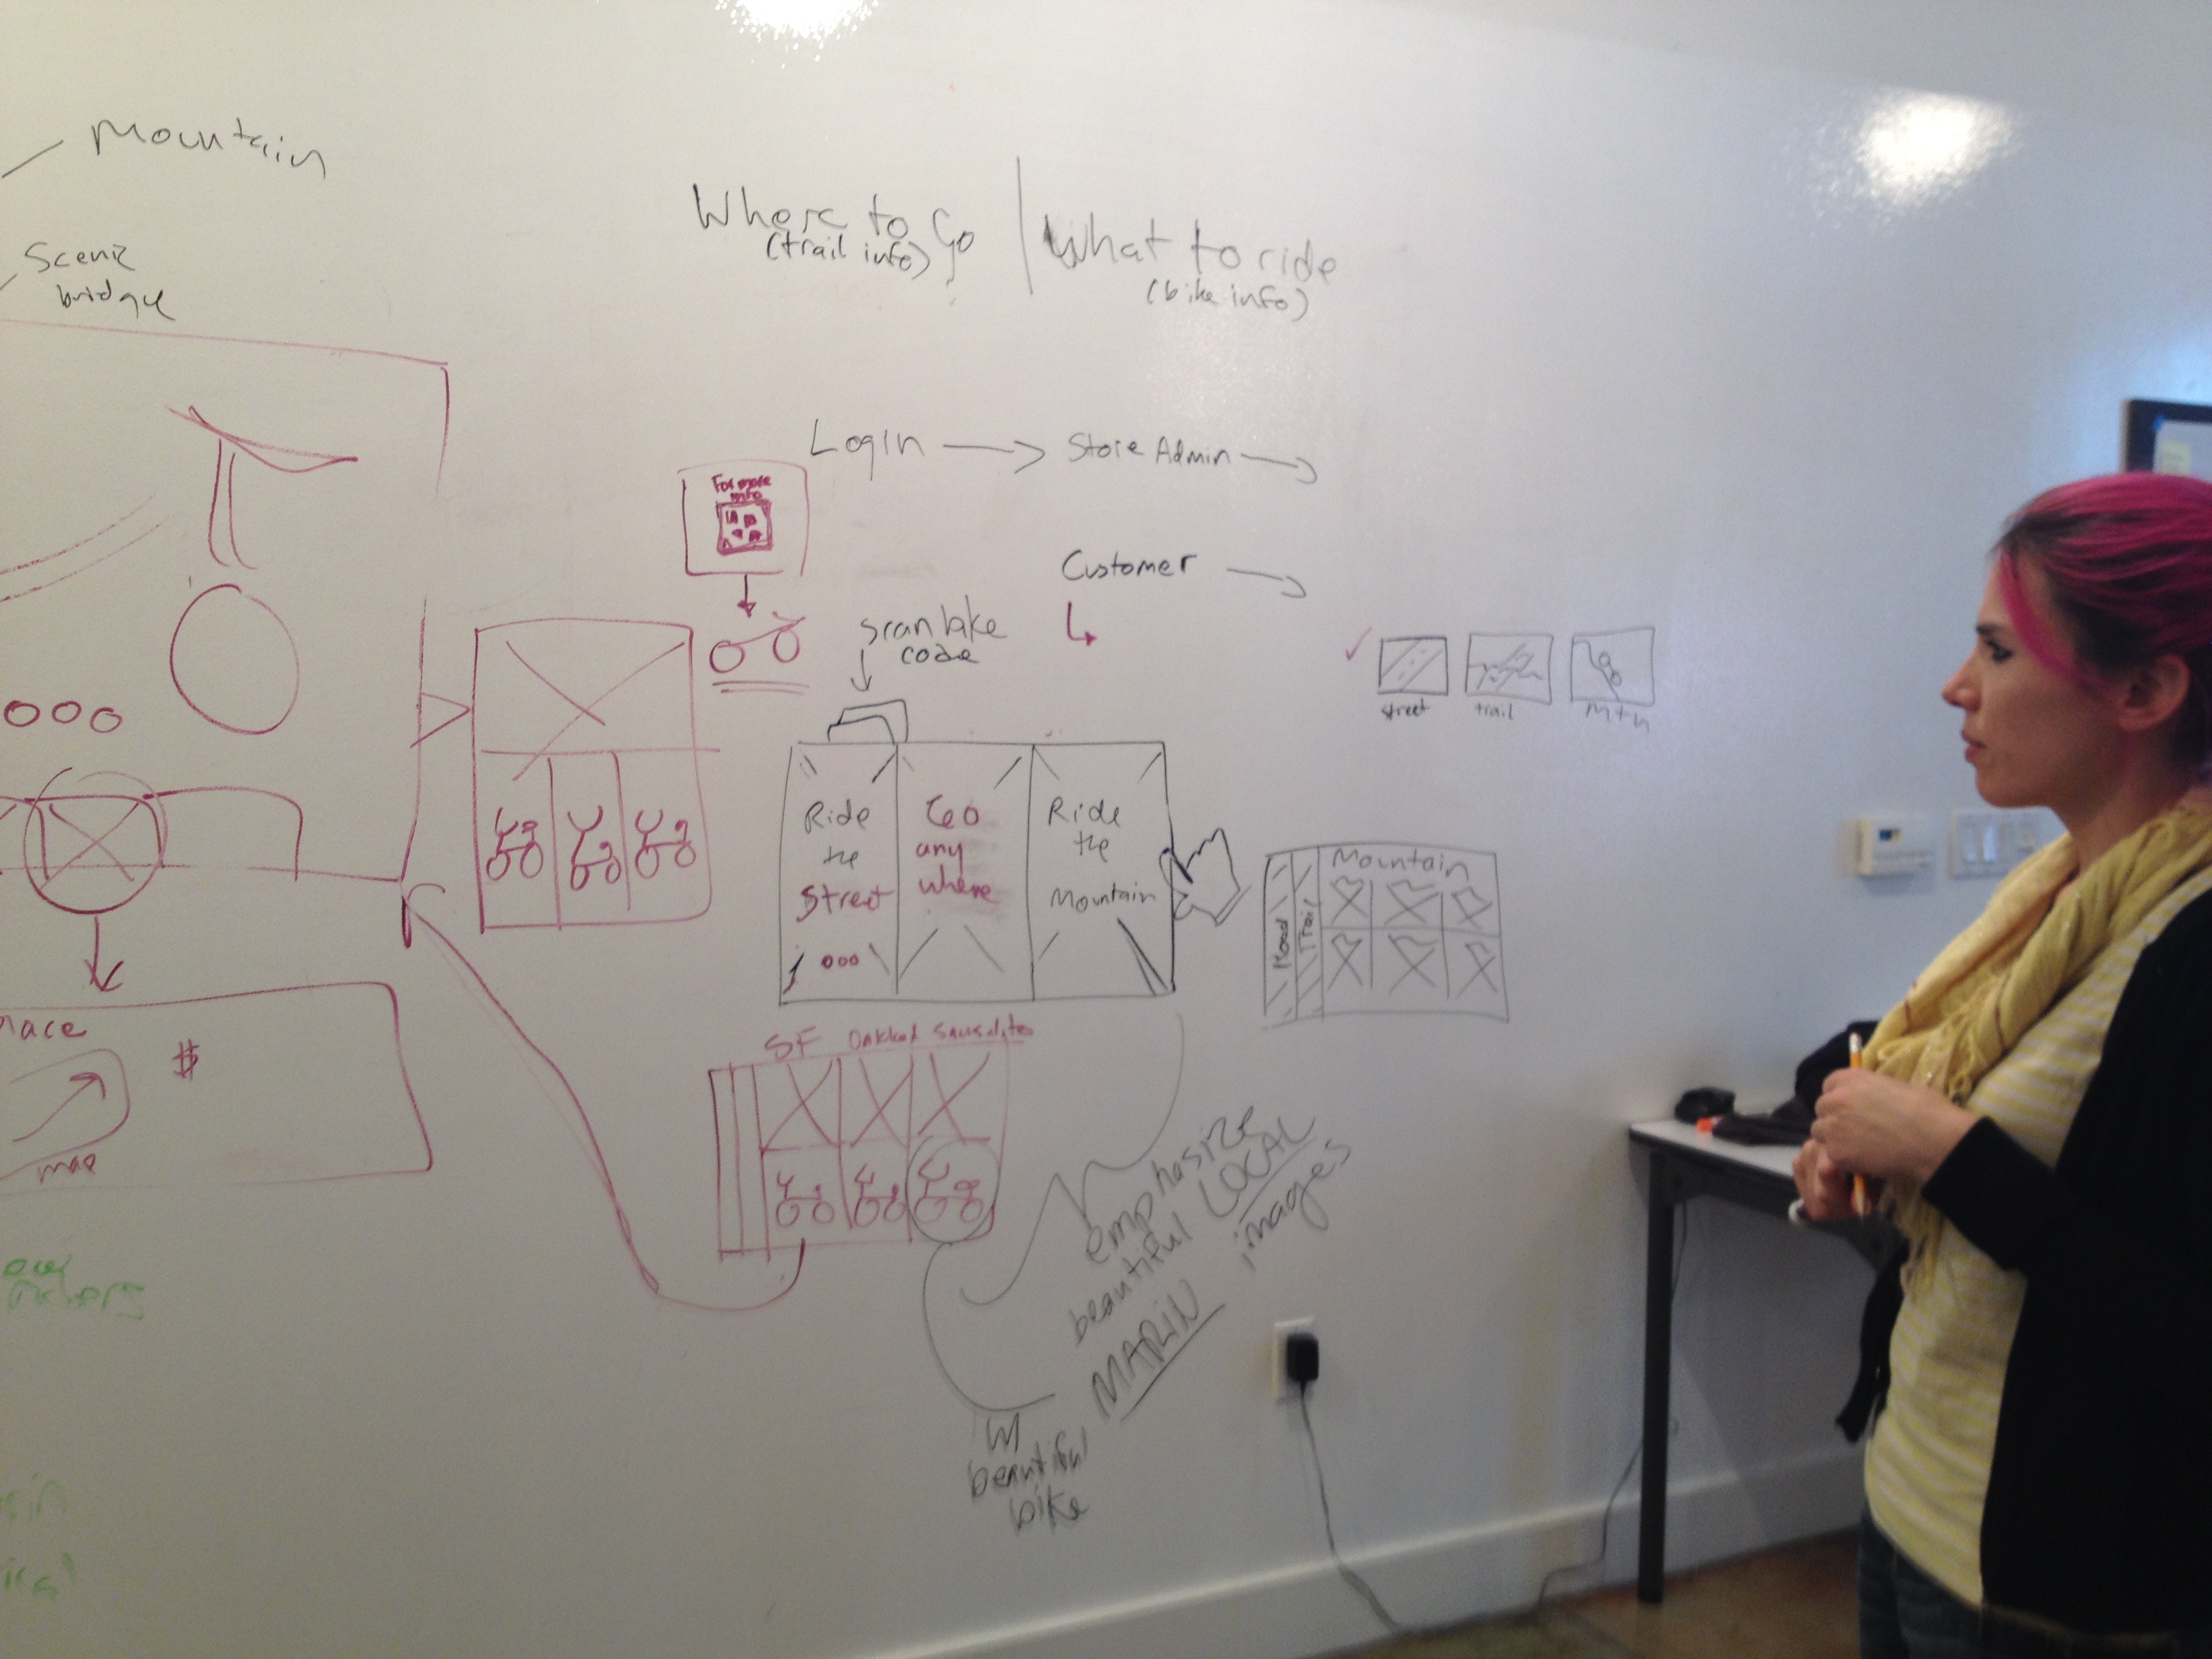 Image of the userflow made with markers on the wall